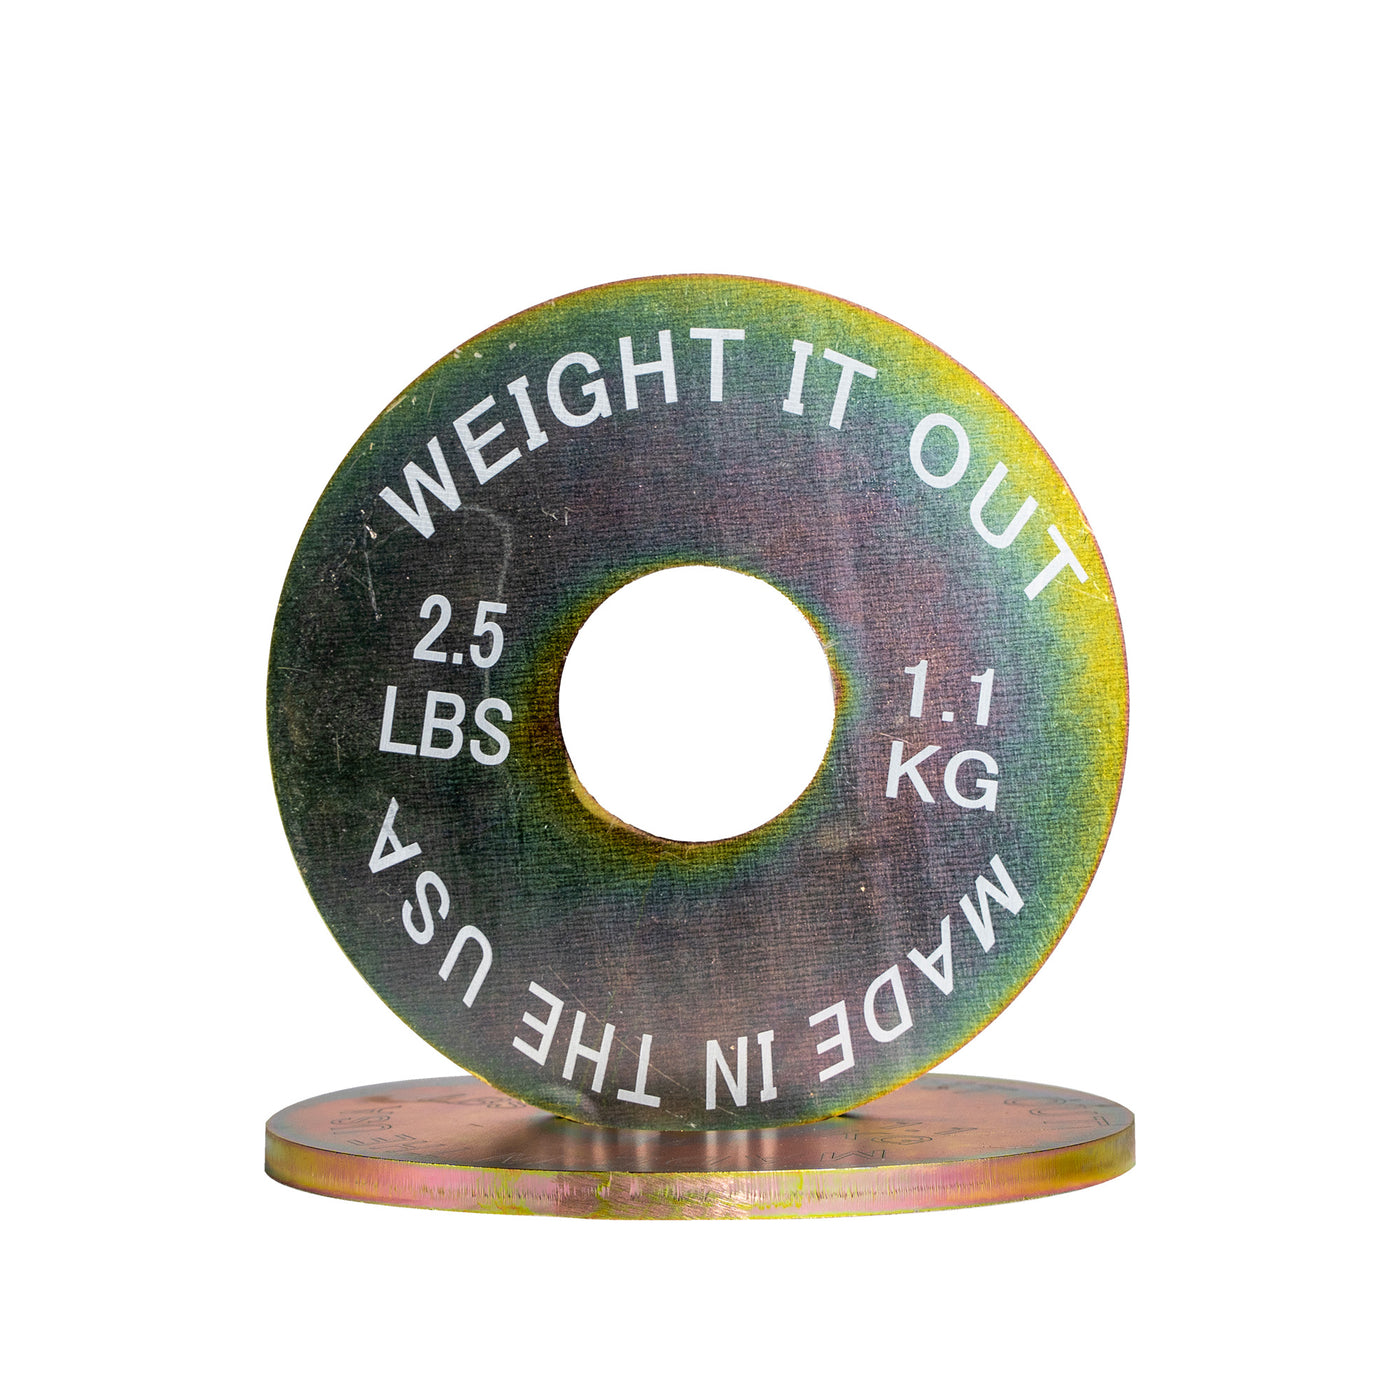 Cast 45lb And Steel Weight Plate Sets